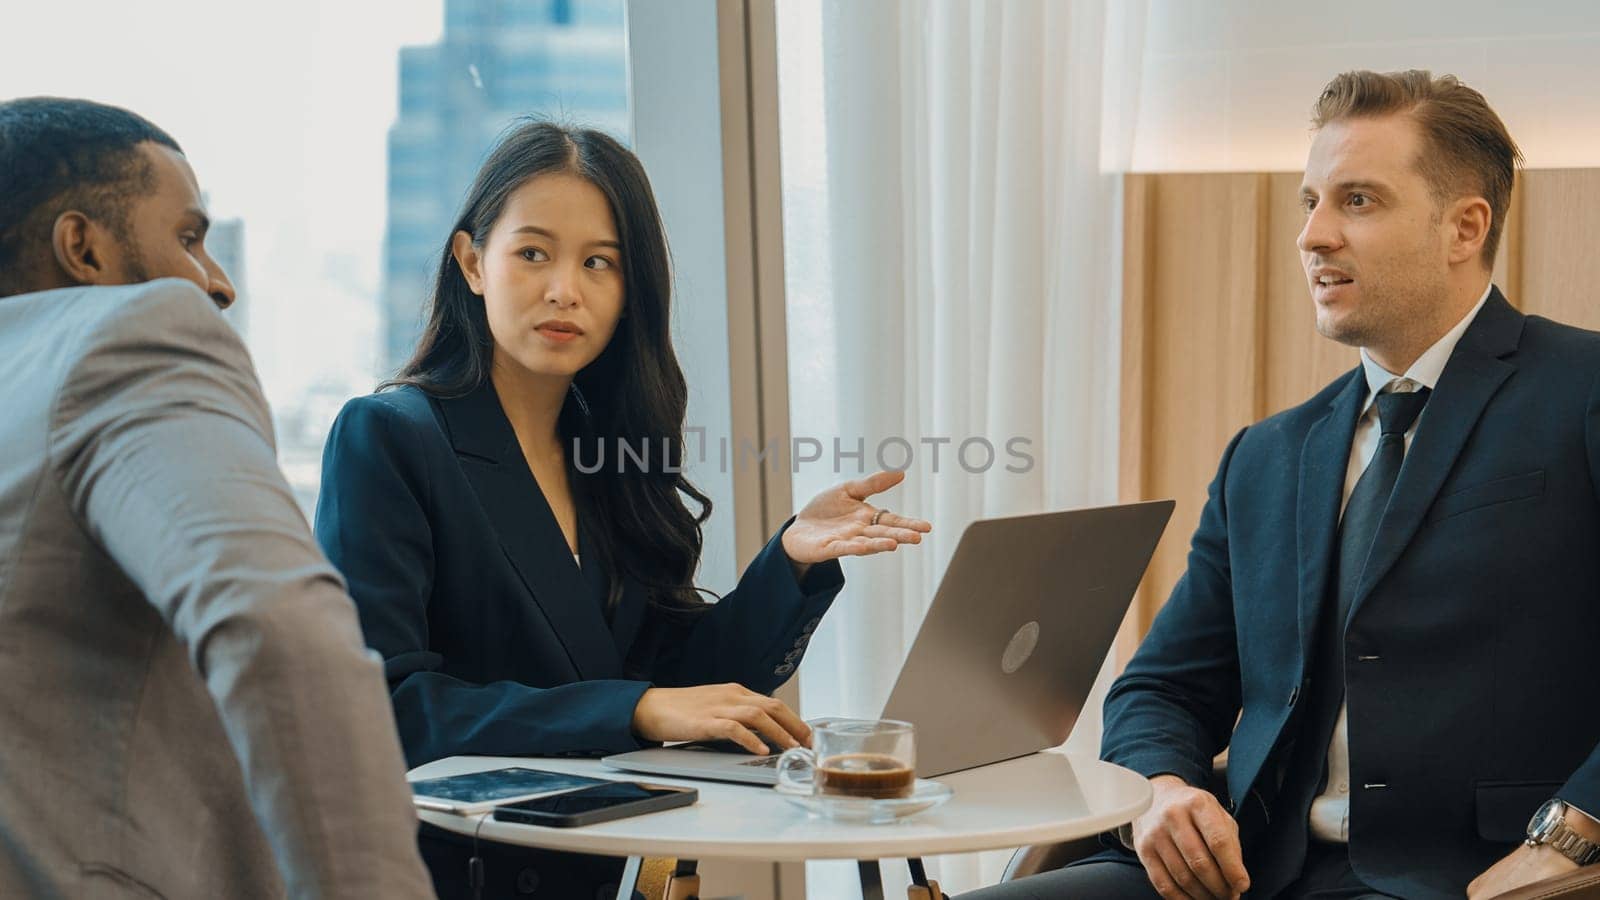 Ornamented office overlooking city skyline, diversity corporate professional discuss ambitious business expansion or strategic marketing. Financial advisor give consulting business insights and idea